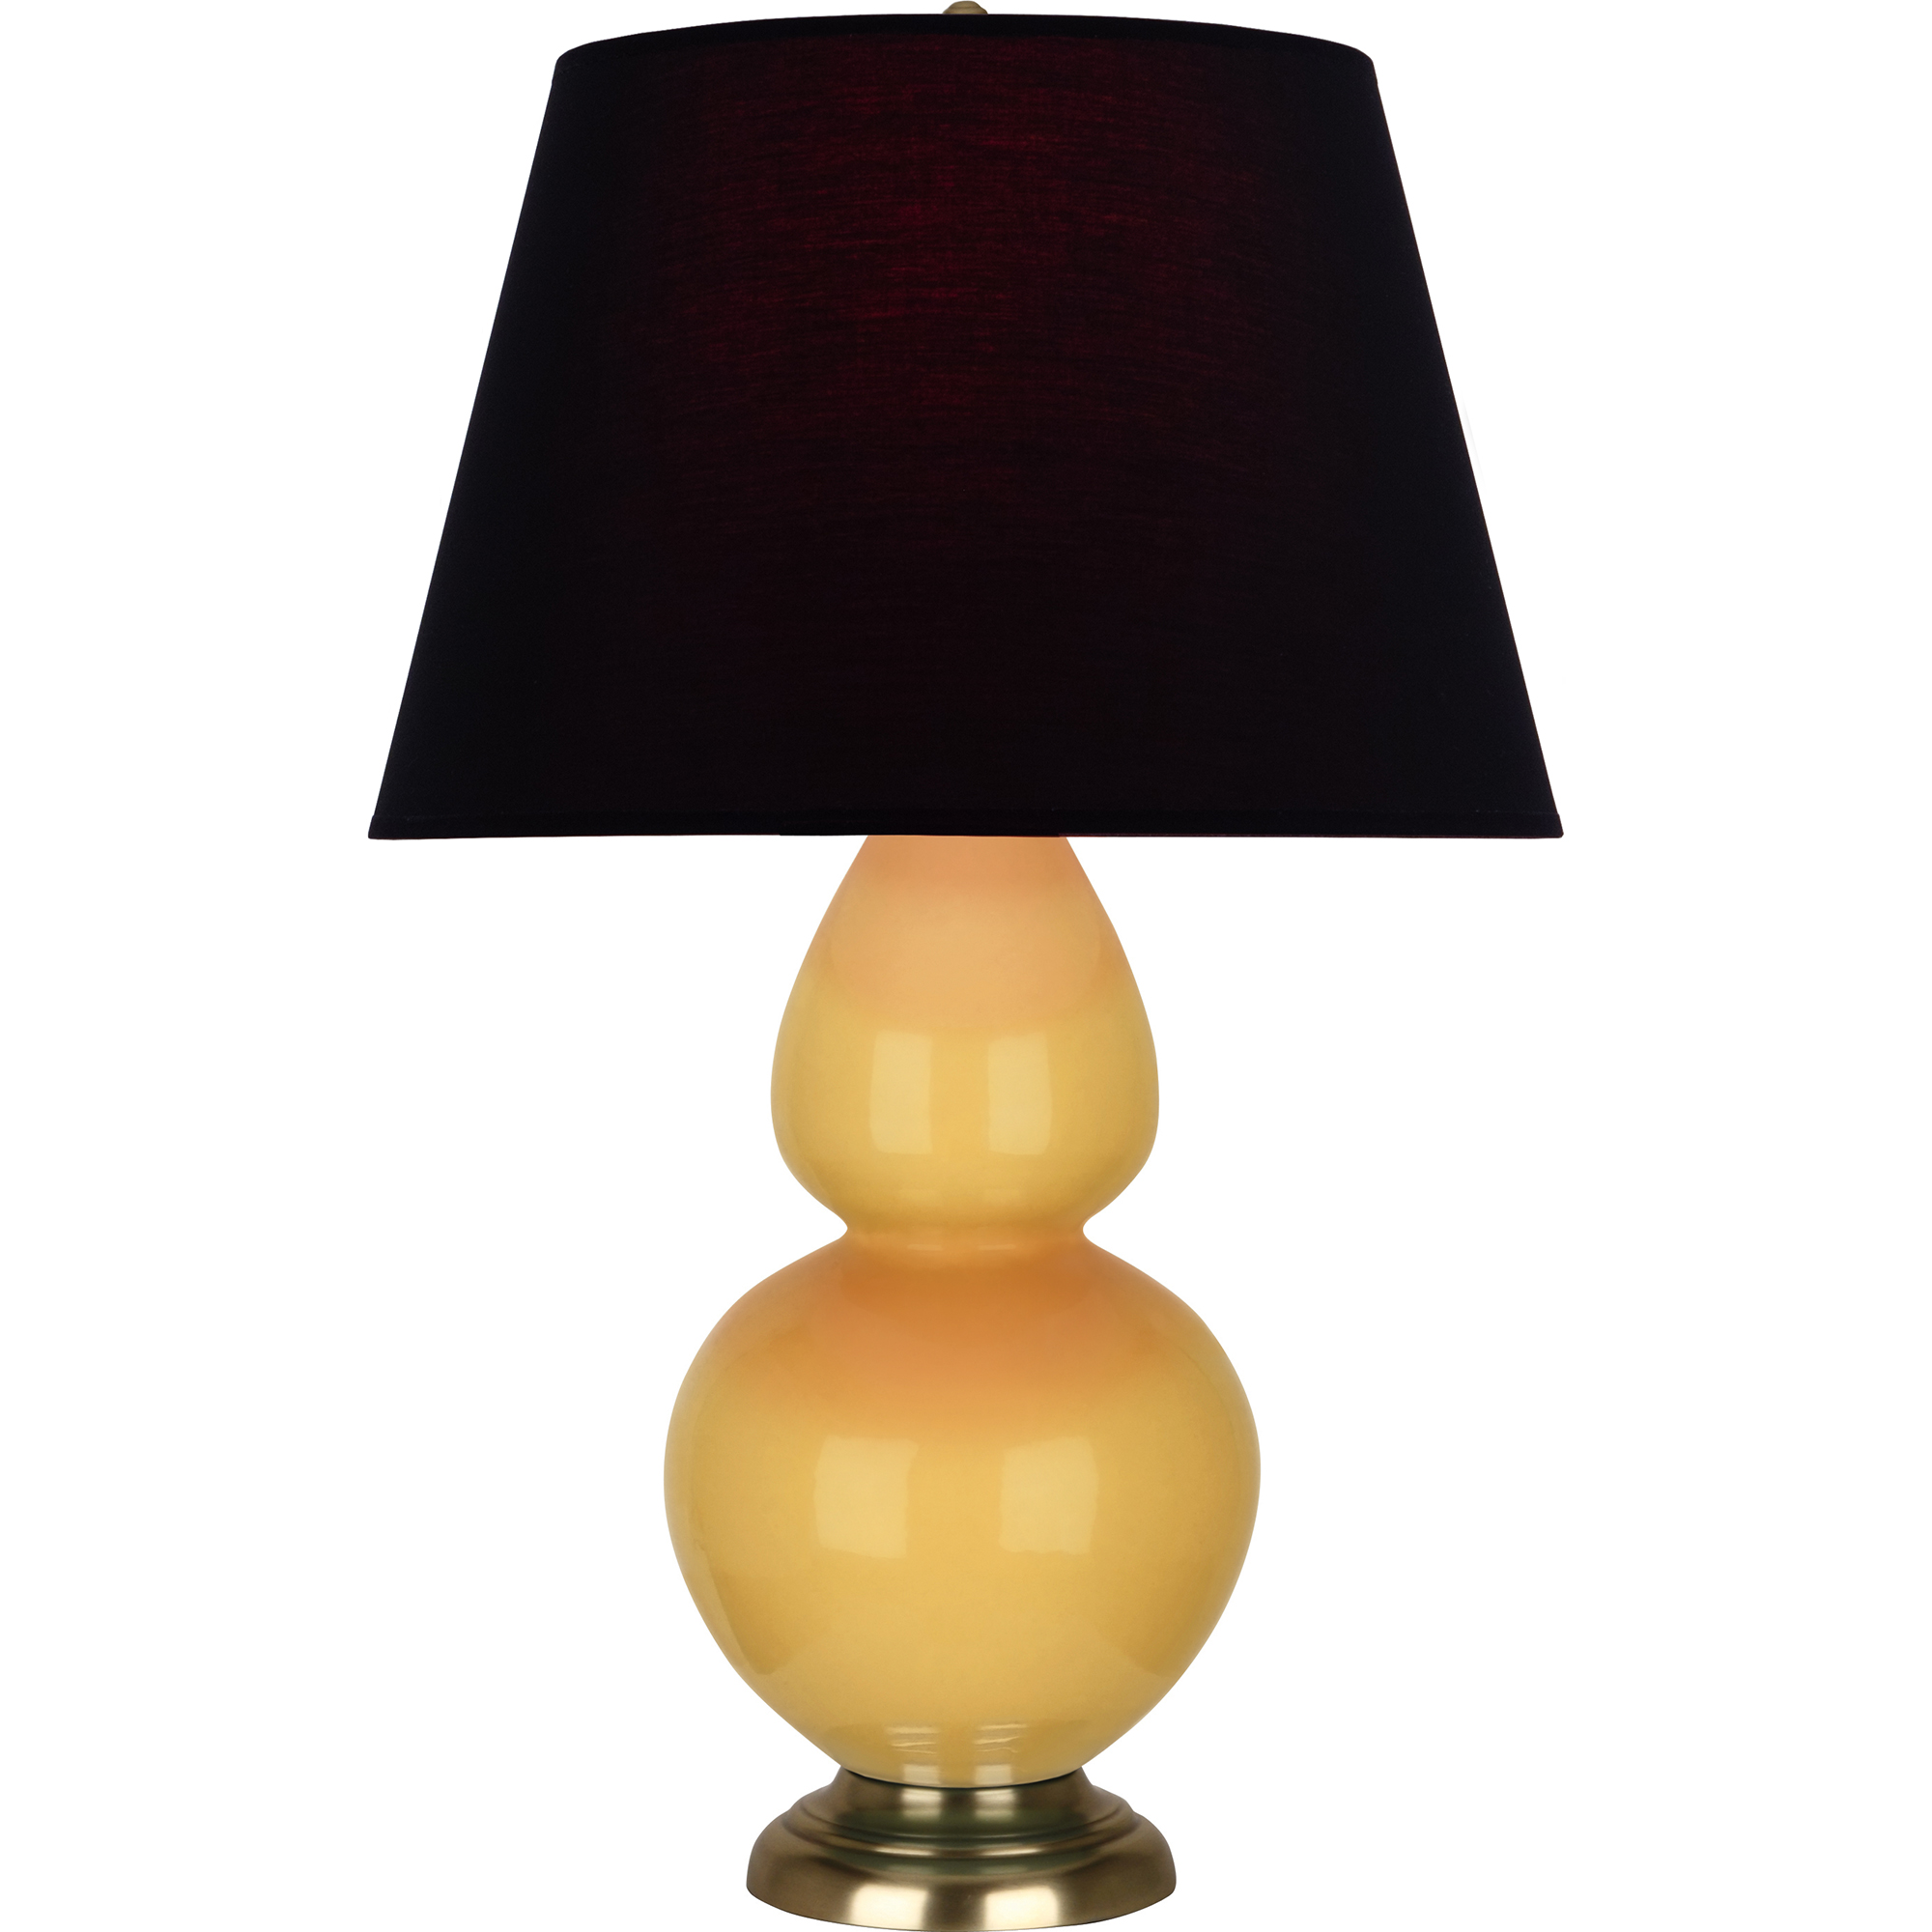 Double Gourd Table Lamp Style #SU20K